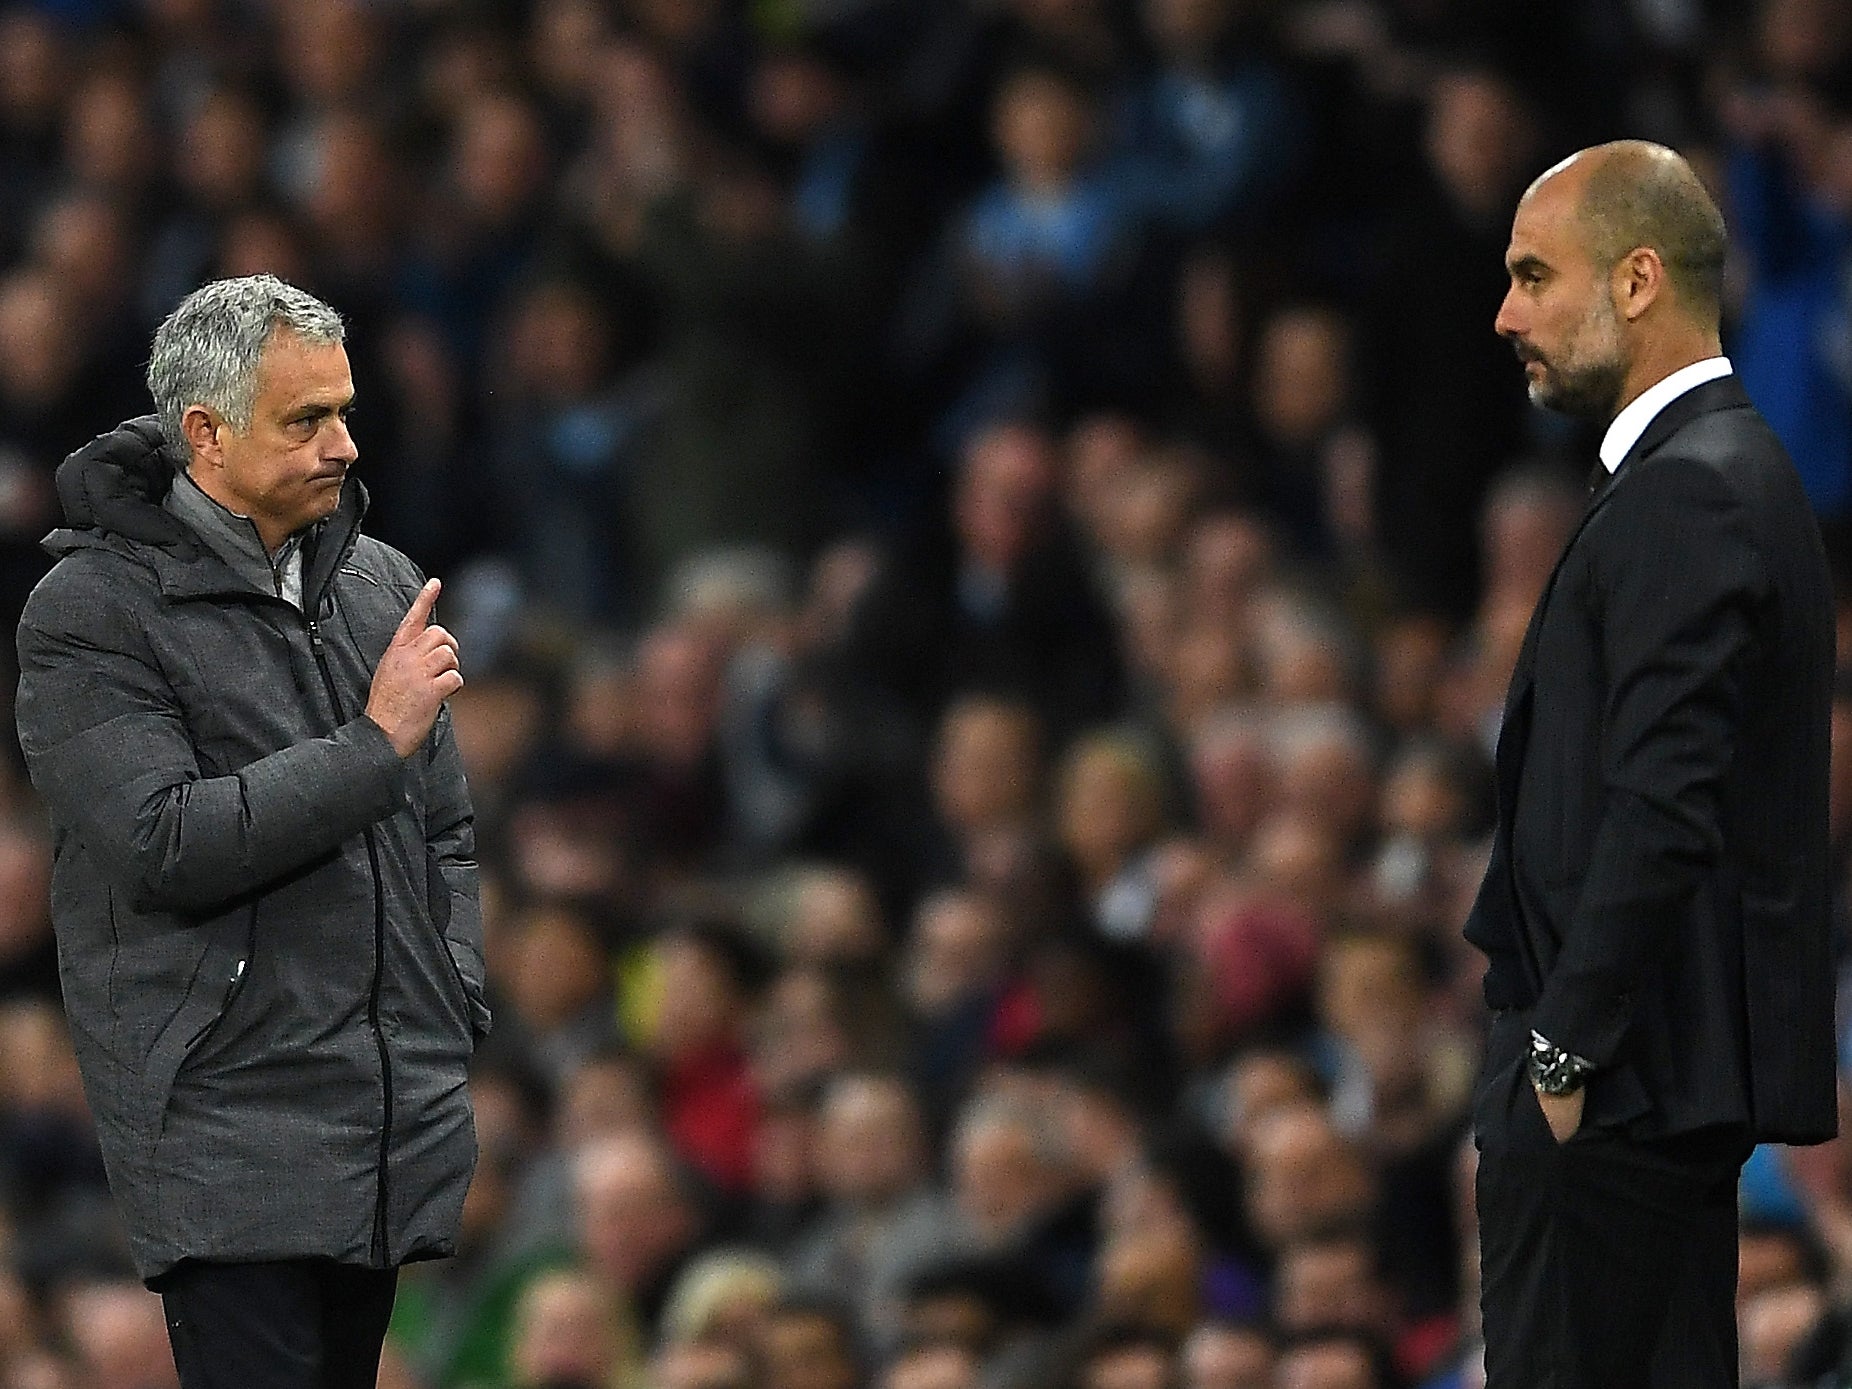 Both managers have struggled in their debut seasons in Manchester